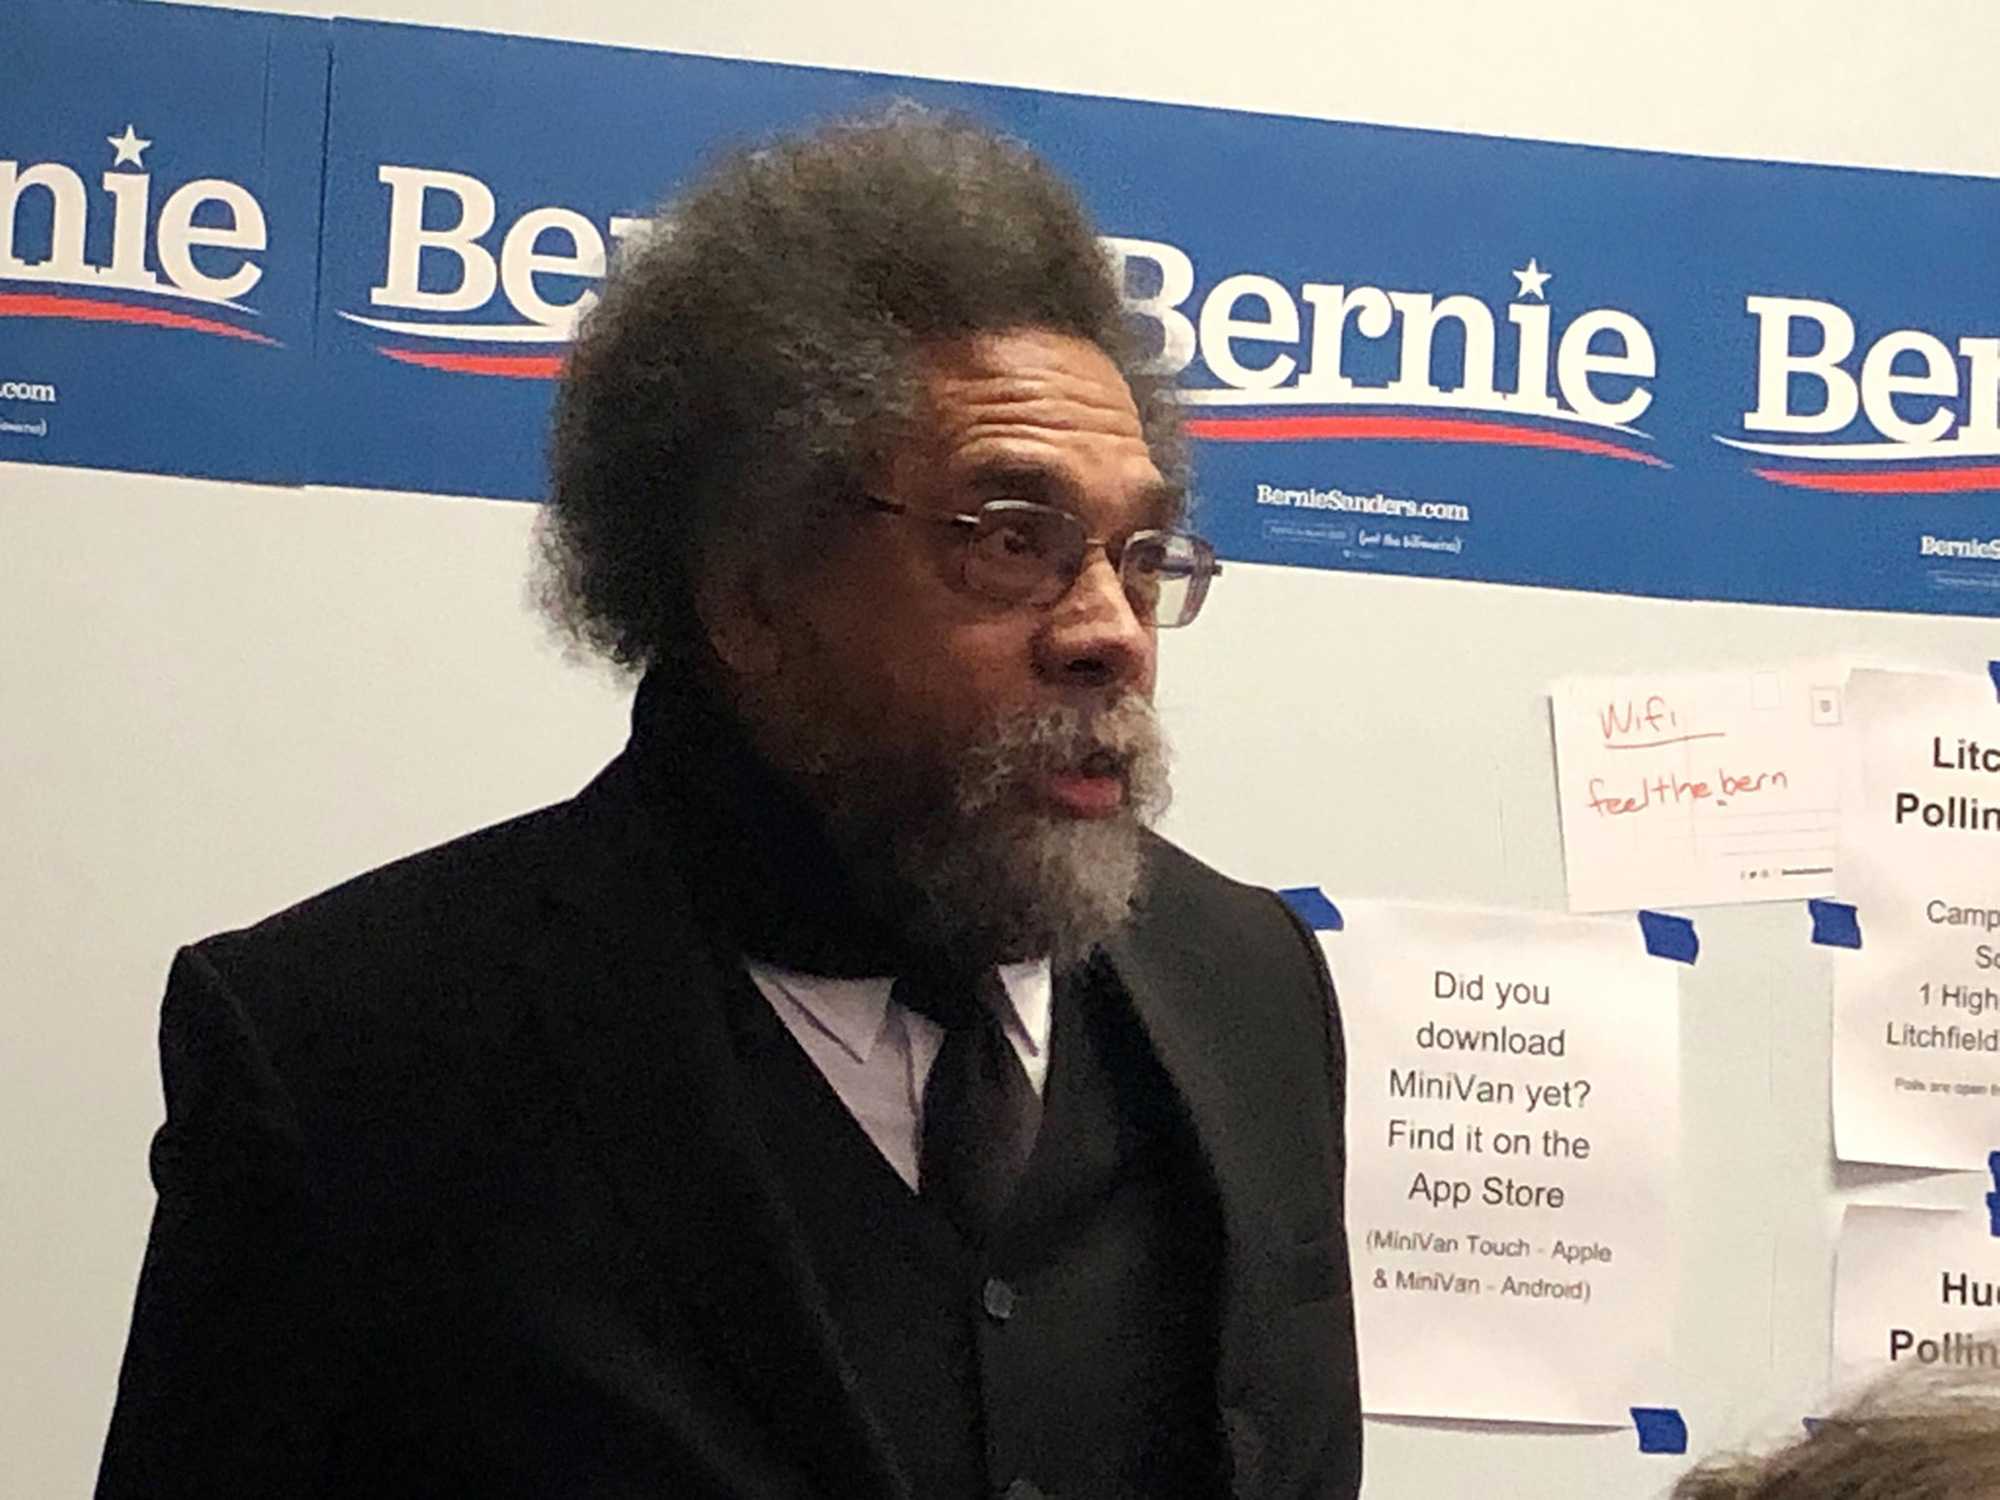 Bernie Sanders campaign co-chair and longtime racial justice scholar Cornel West shows up at the Nashua, N.H., area Sanders field office where some 50 volunteers were preparing to go knock on doors. He launched into a riff that zagged from motivational to angry to defiant in the space of 12 minutes. It was the first of several such stops he would make on February 11, 2020. (Evan Halper/Los Angeles Times/TNS)